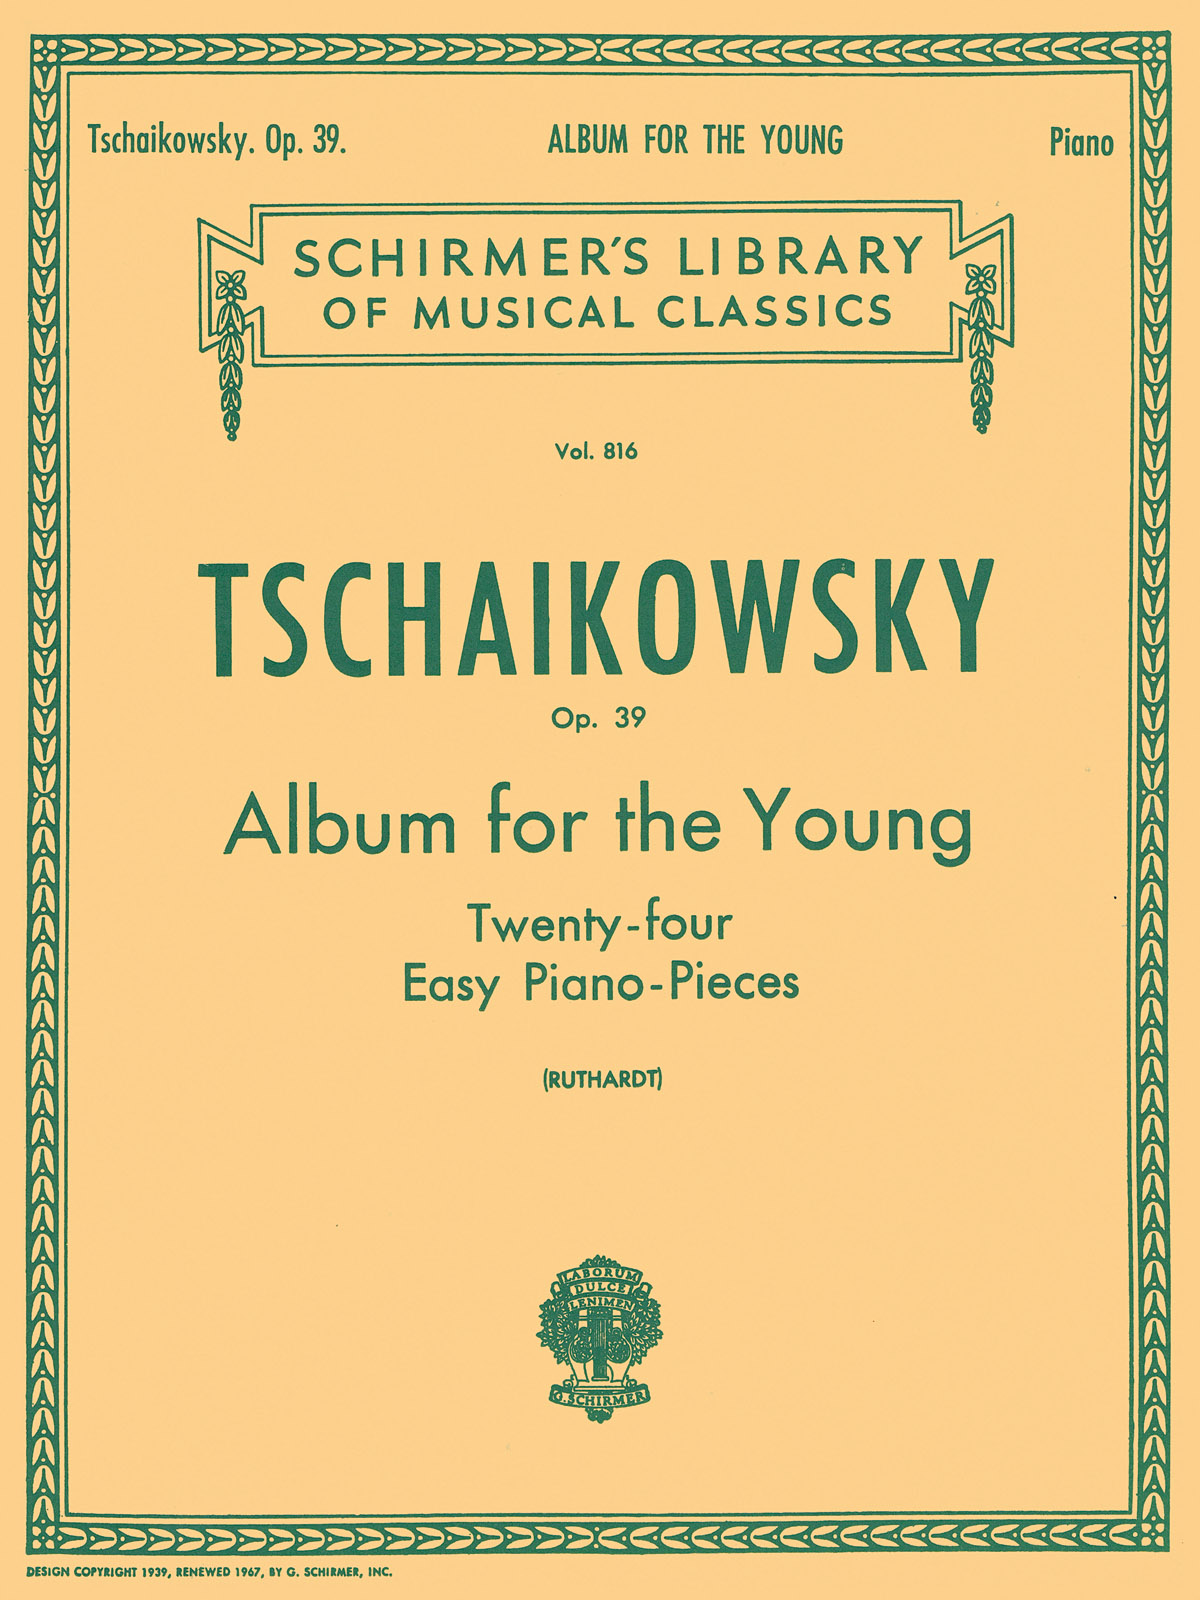 Tchaikovsky: Album For The Young